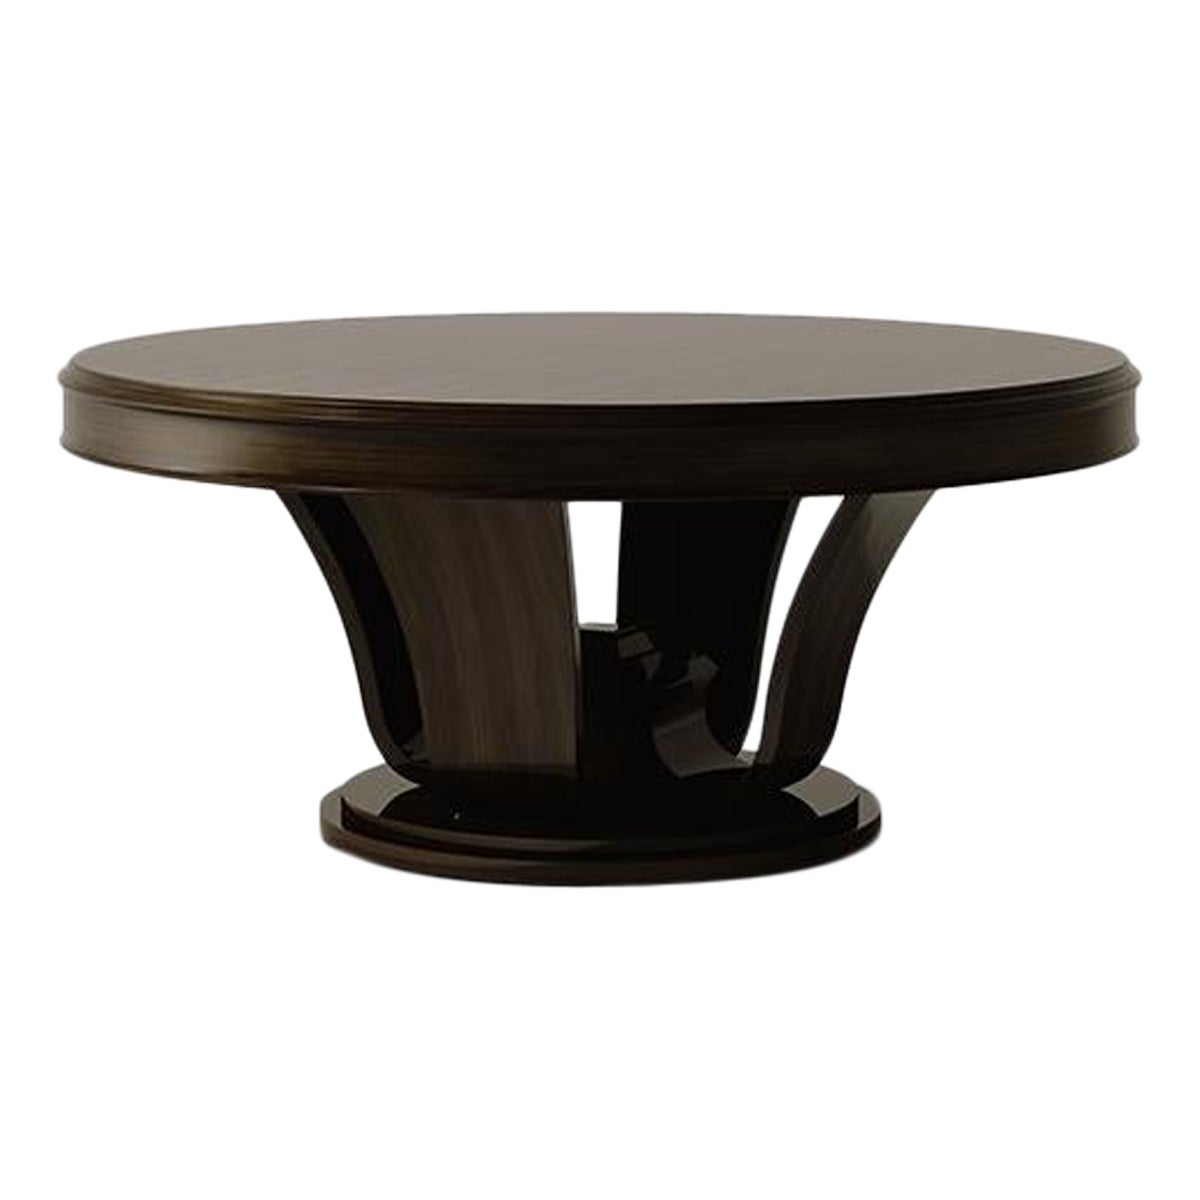 21st Century Carpanese Home Italia Table with Wooden Base Neoclassic, 6606 For Sale